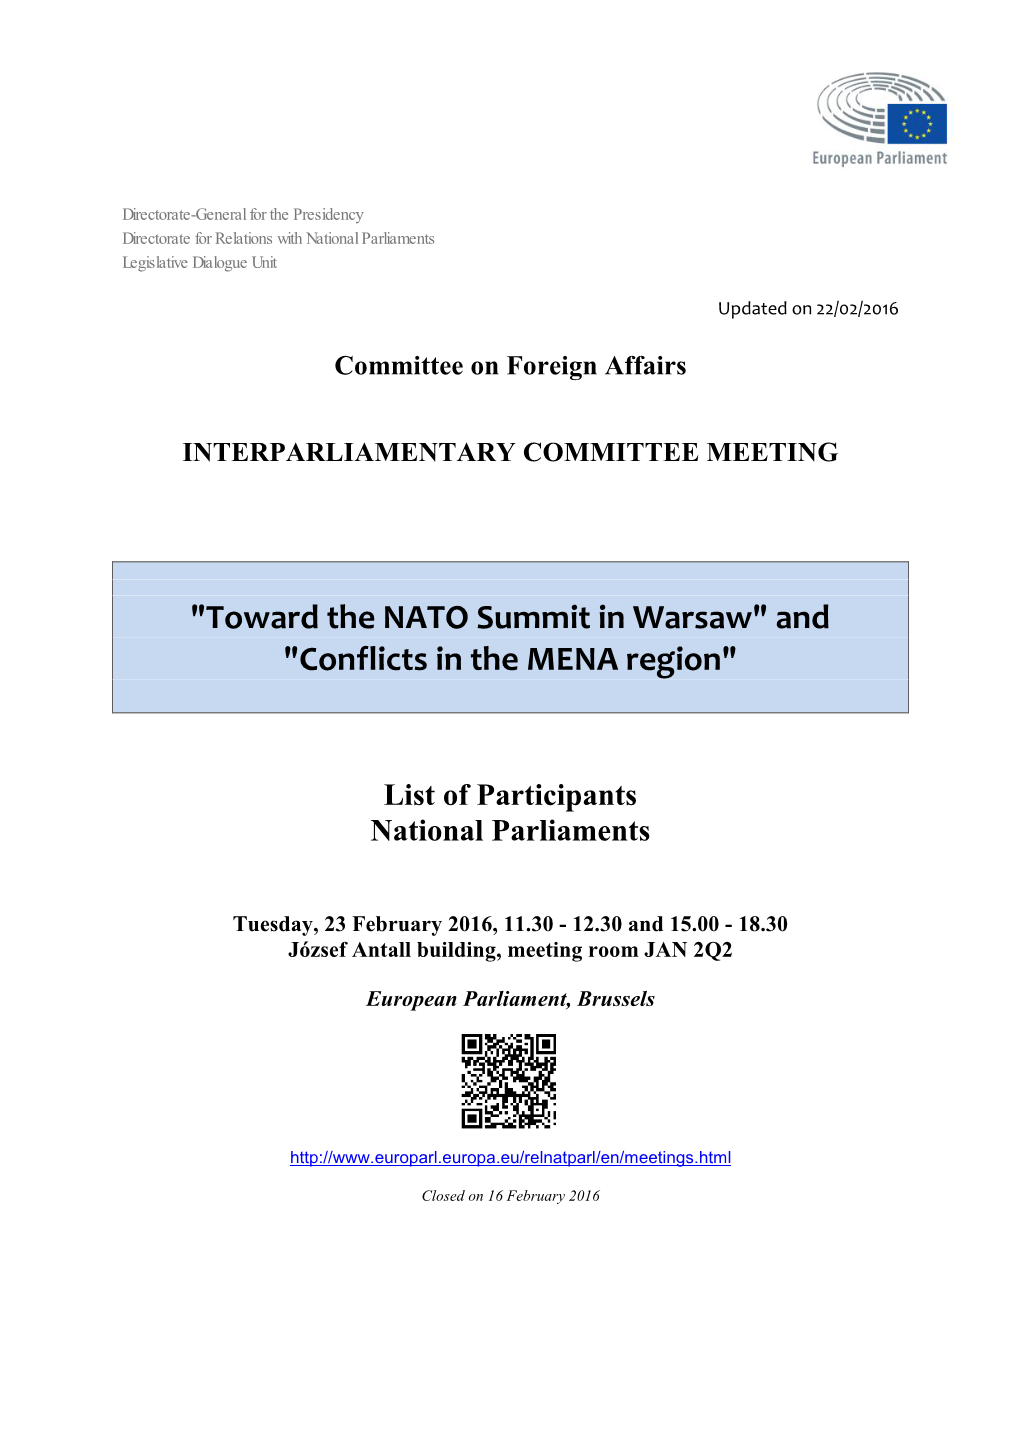 "Toward the NATO Summit in Warsaw" and "Conflicts in the MENA Region"